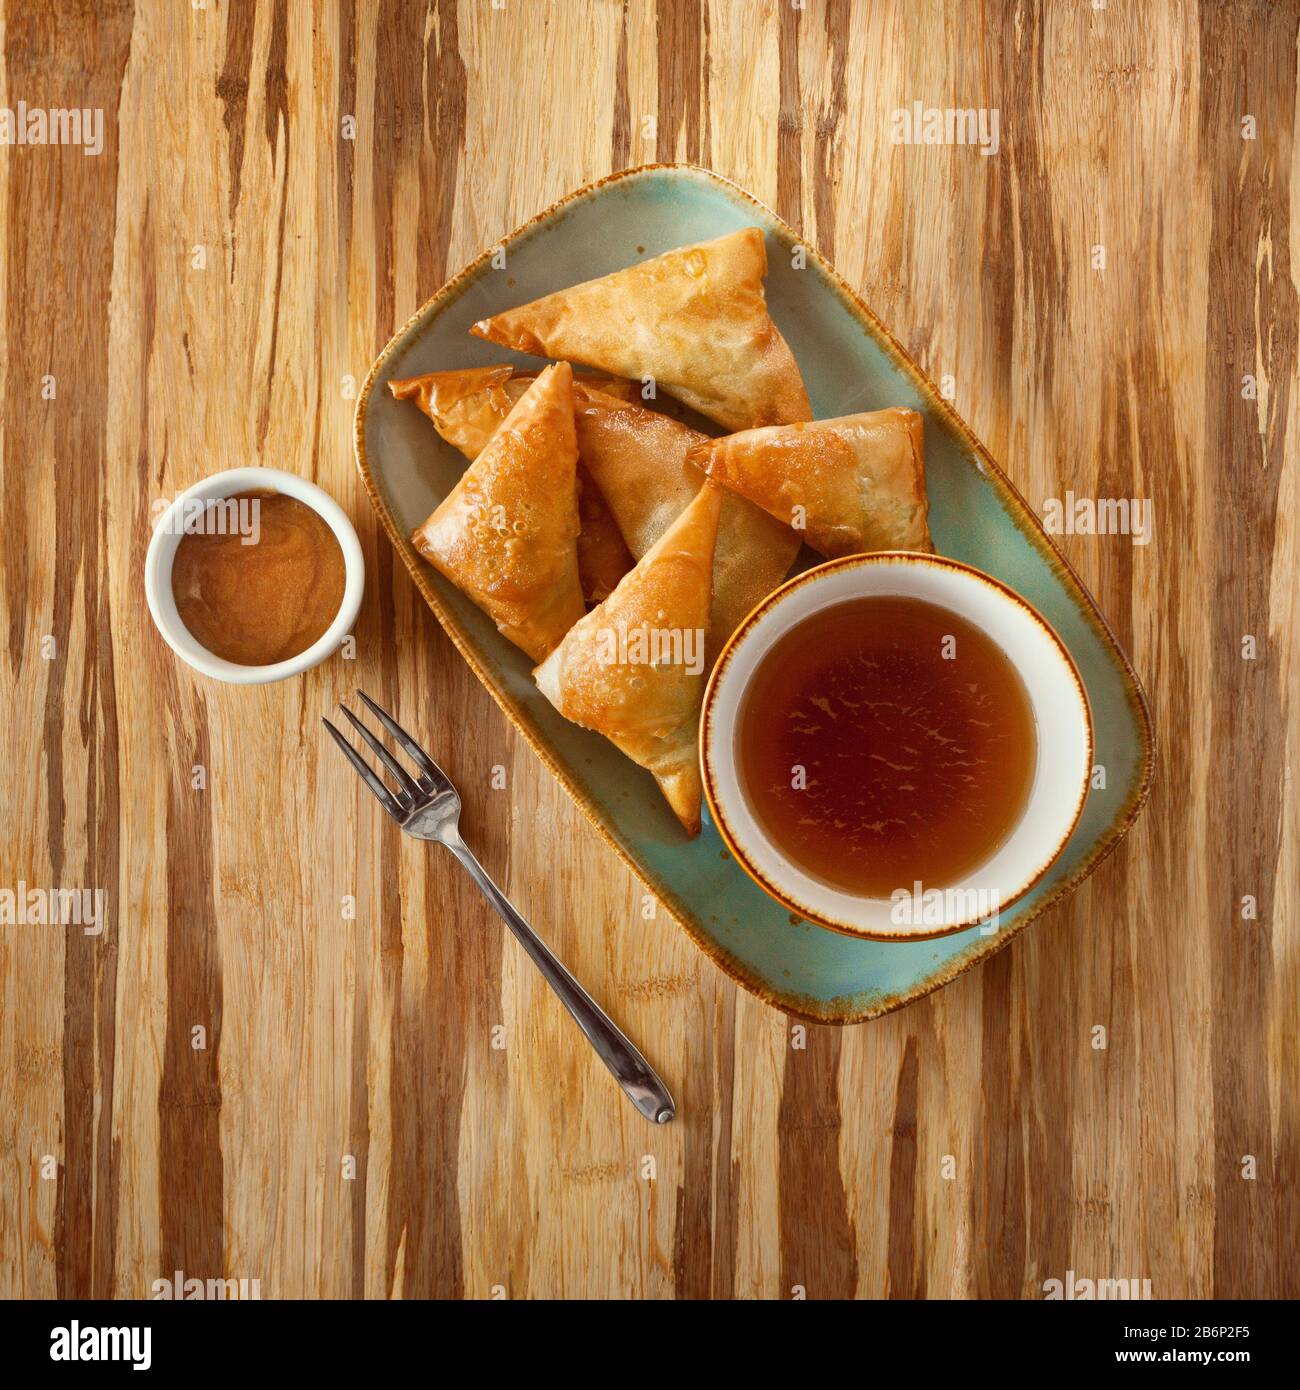 moroccan food, stuffed pasties dish on a plate with soup and sauce, on a wooden table and copy space for text Stock Photo